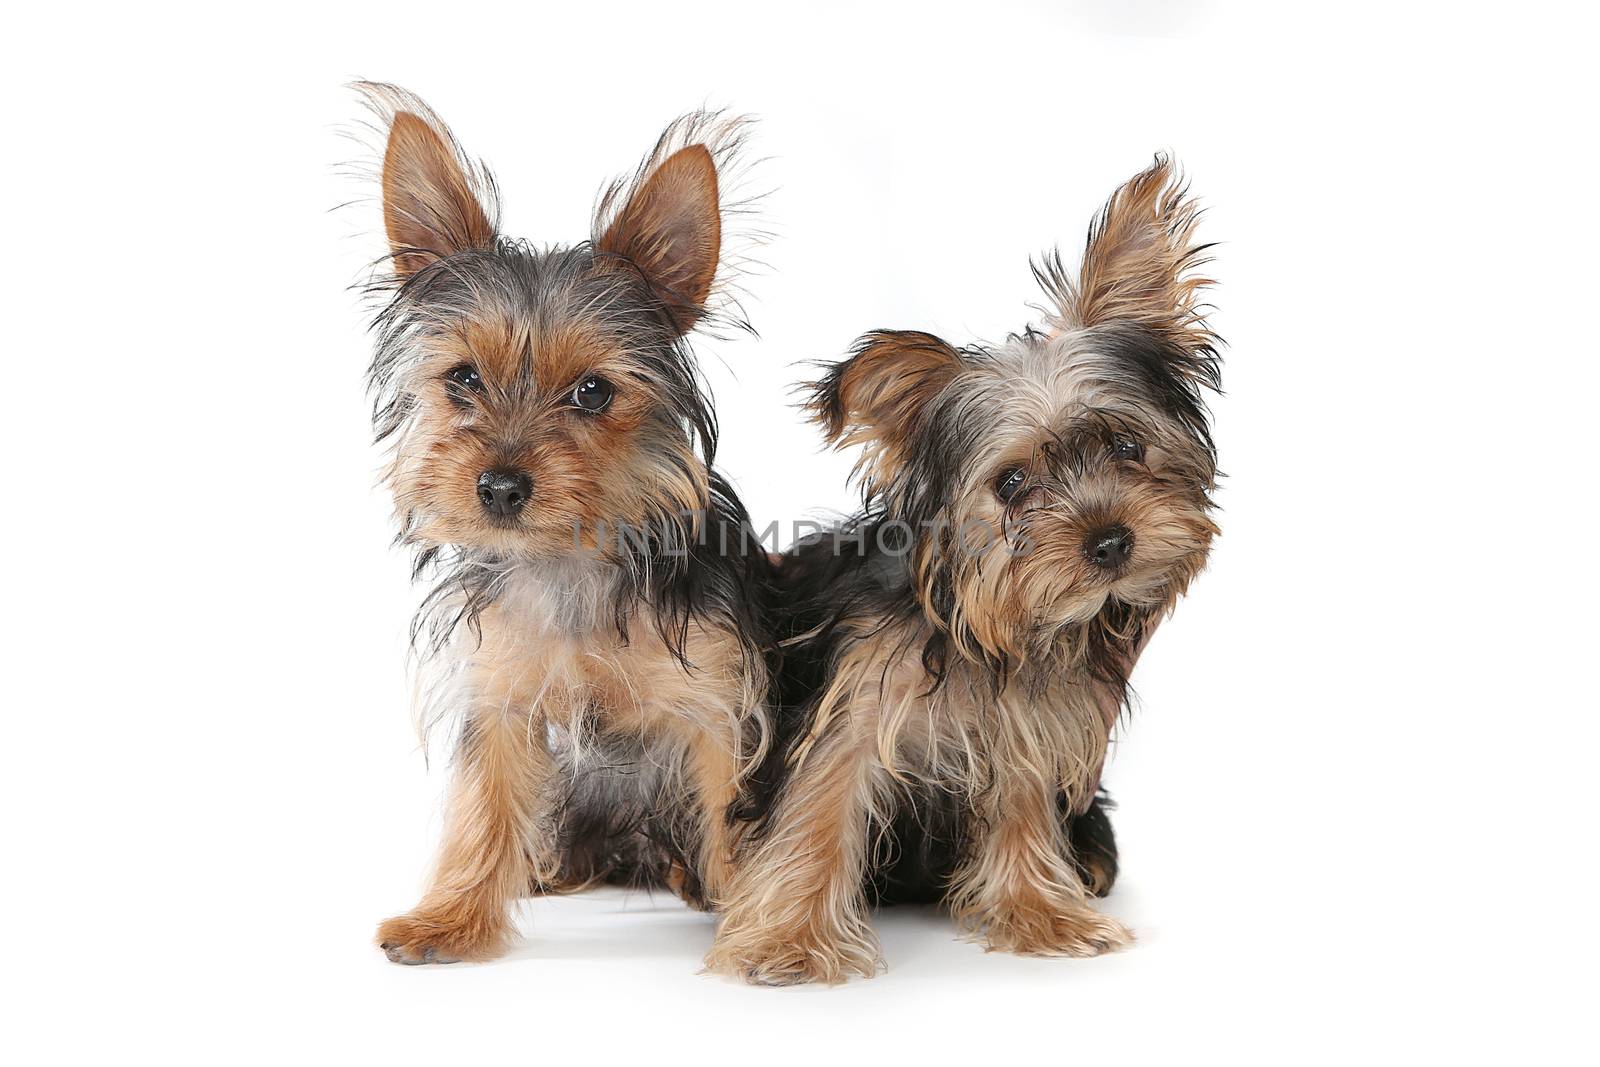 Yorkshire Terrier Puppies Sitting on White Background   by tobkatrina